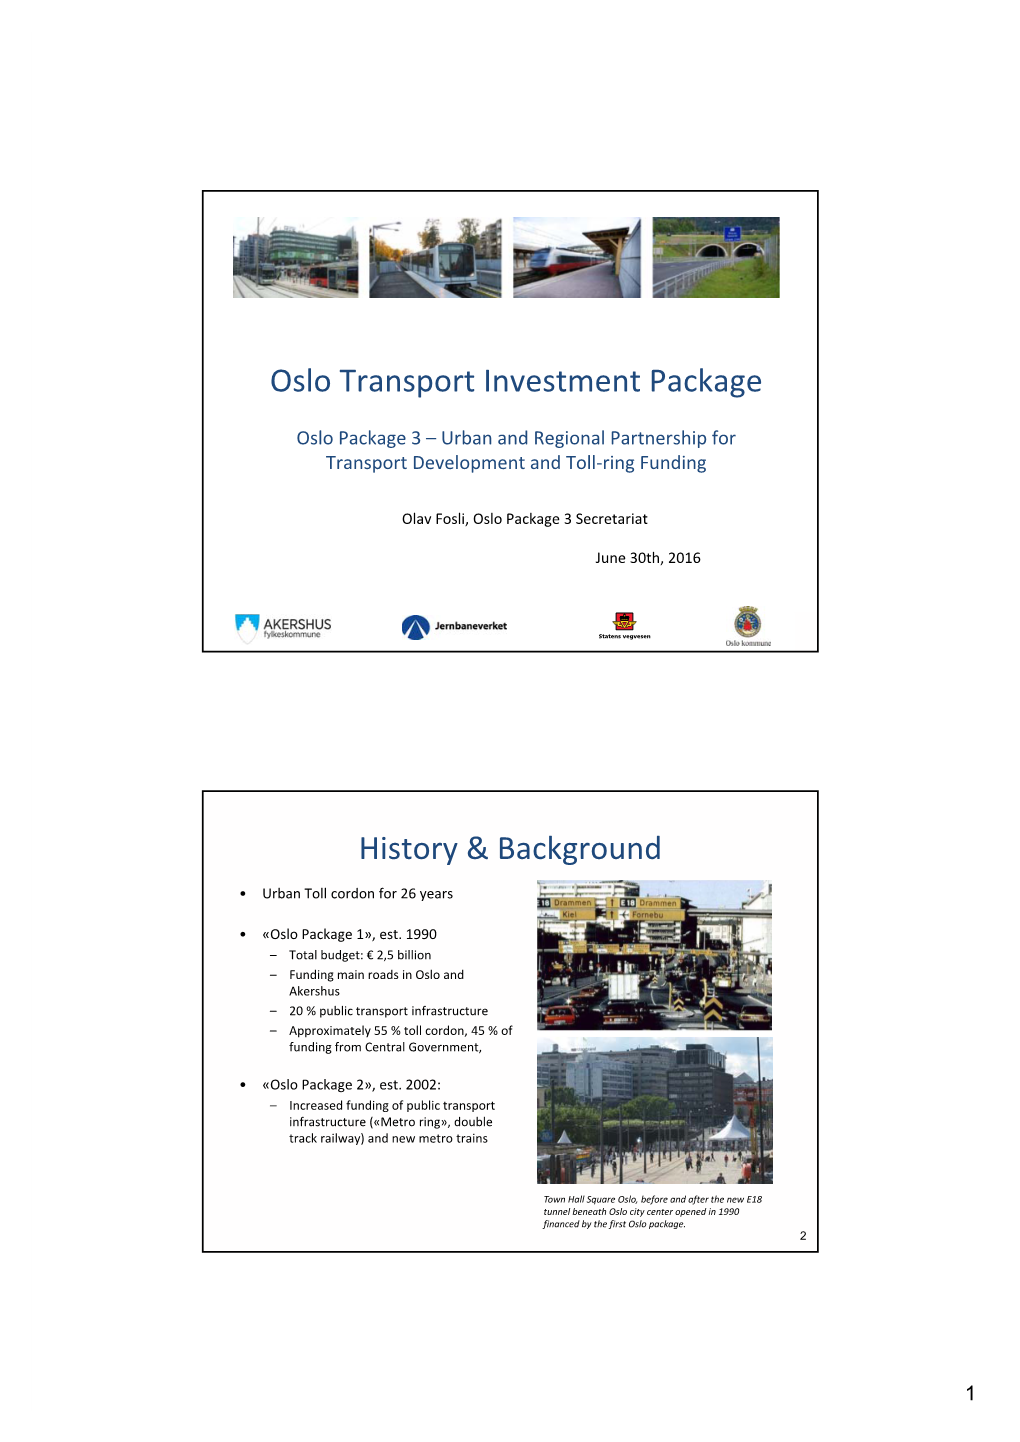 Oslo Transport Investment Package History & Background